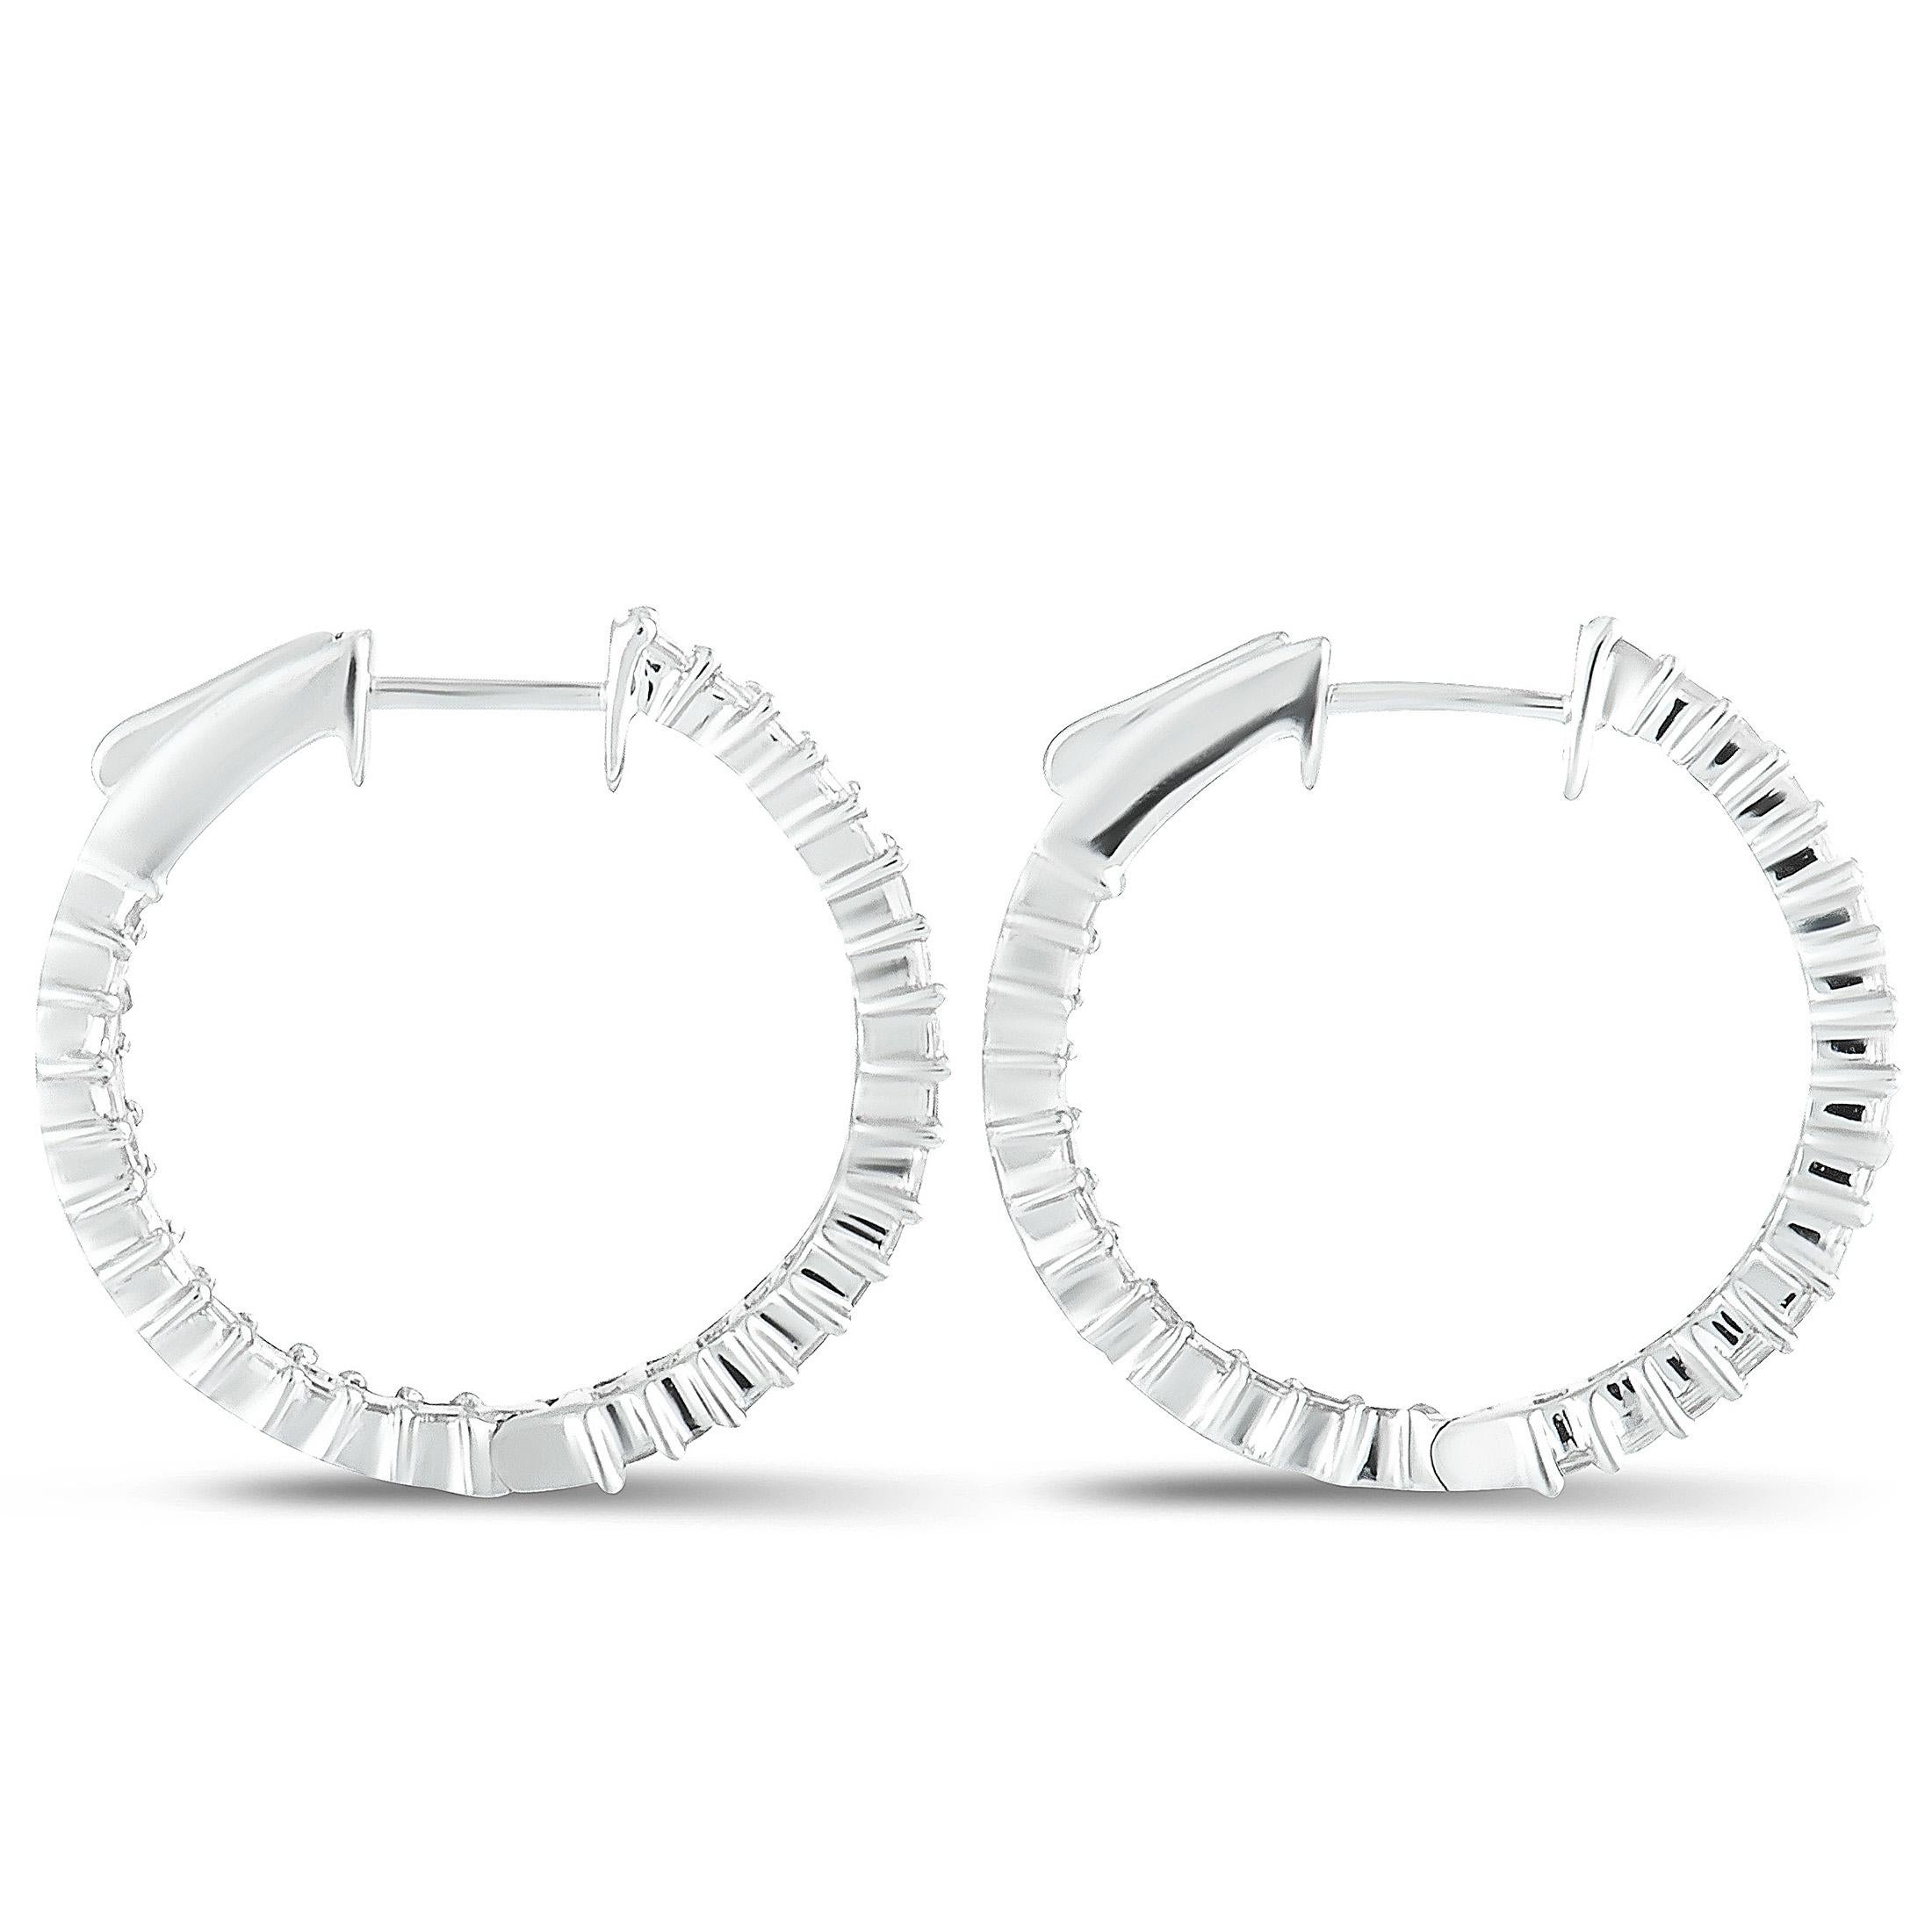 Embodying the very essence of refined extravagance, these sublime hoop earrings boast a stunningly luxurious appeal that will give a sublime touch of prestigious elegance to any ensemble of yours. The earrings are  crafted from gleaming 18K white